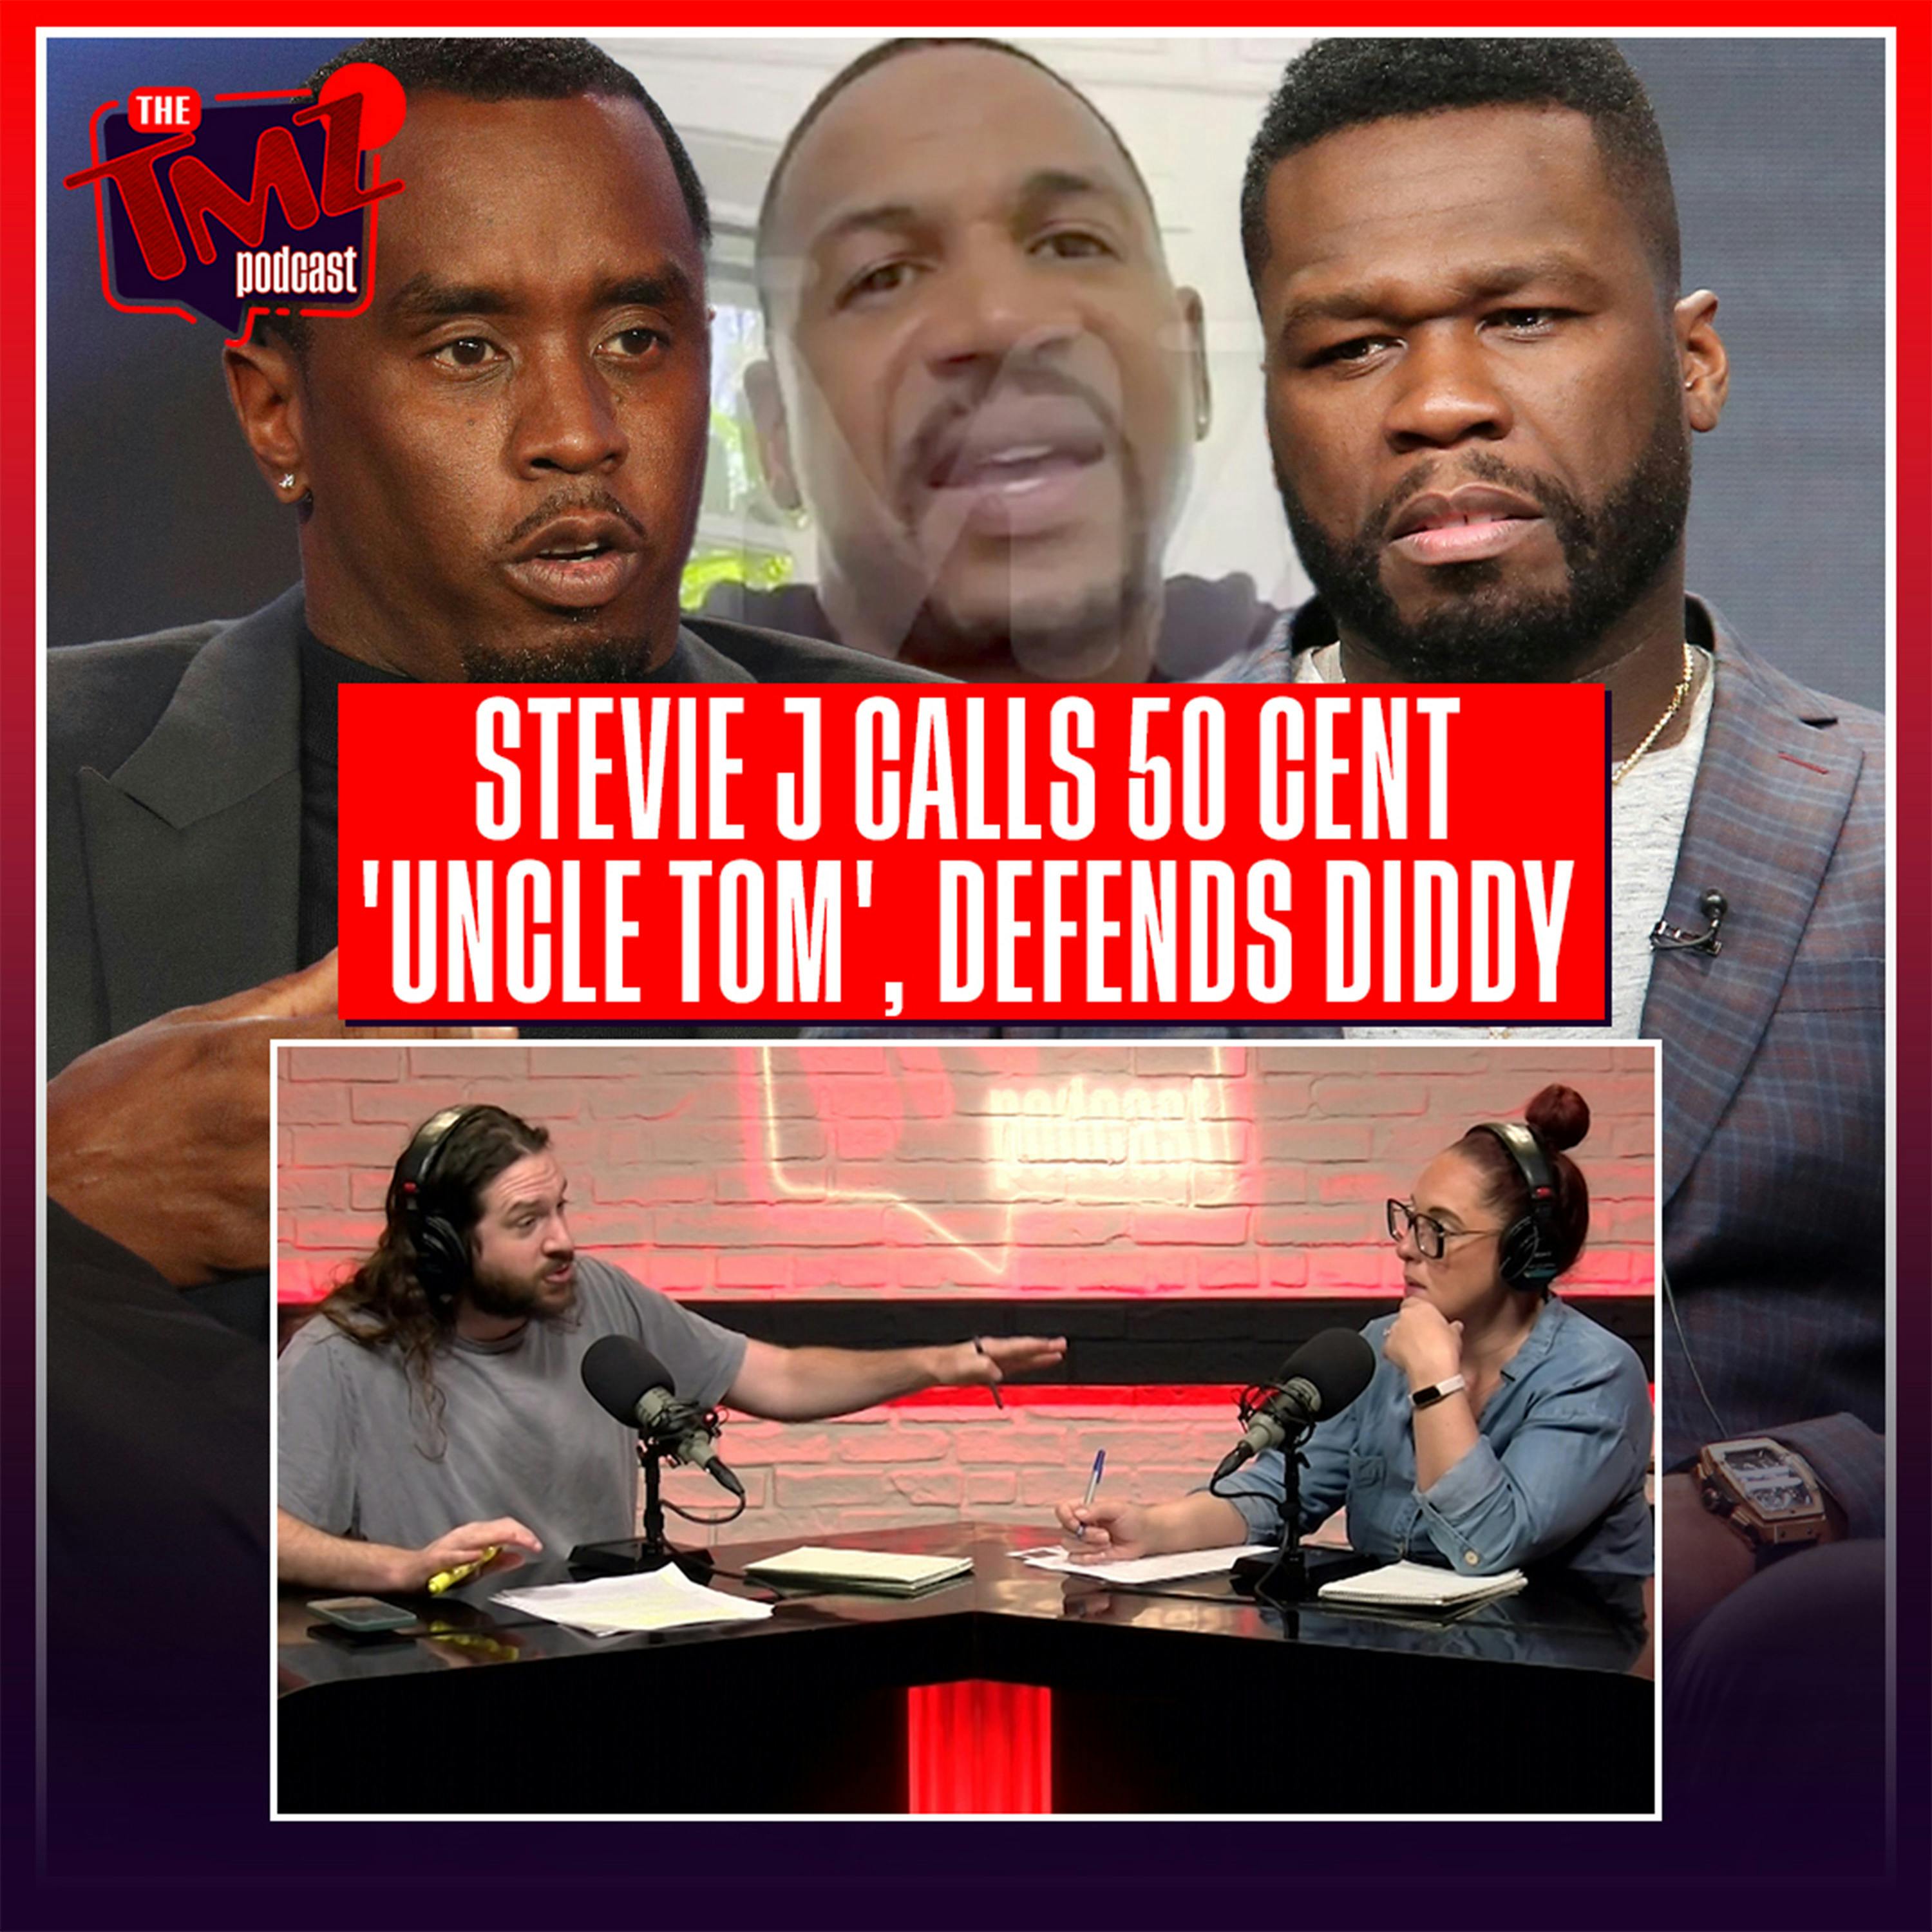 Stevie J Defends Diddy & Calls 50 Cent an 'Uncle Tom!'